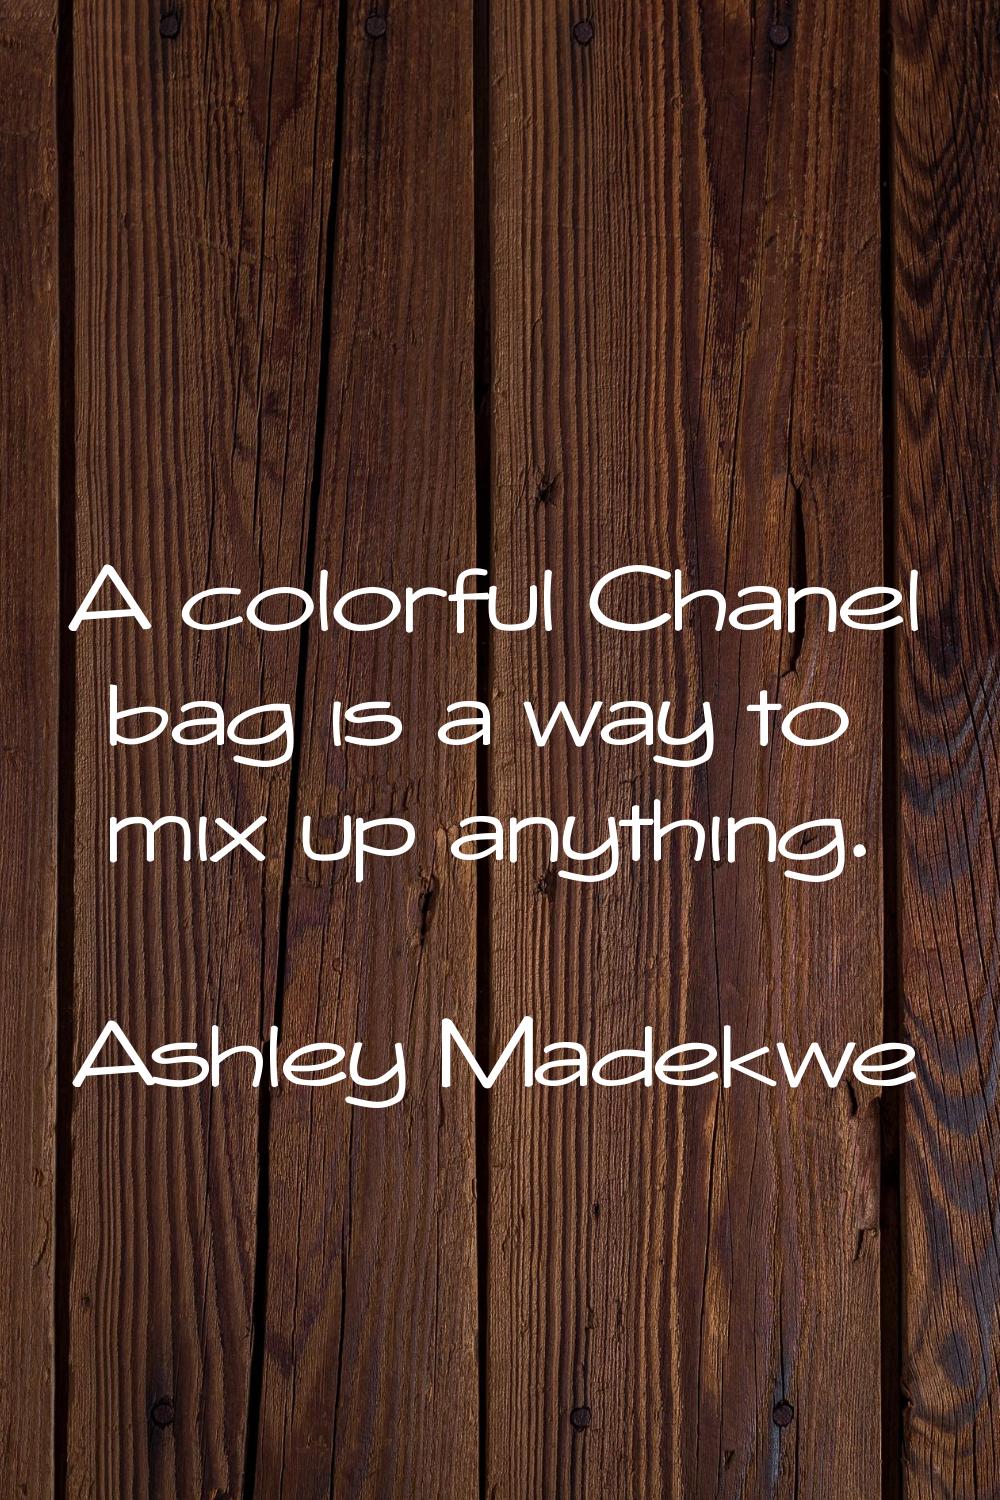 A colorful Chanel bag is a way to mix up anything.